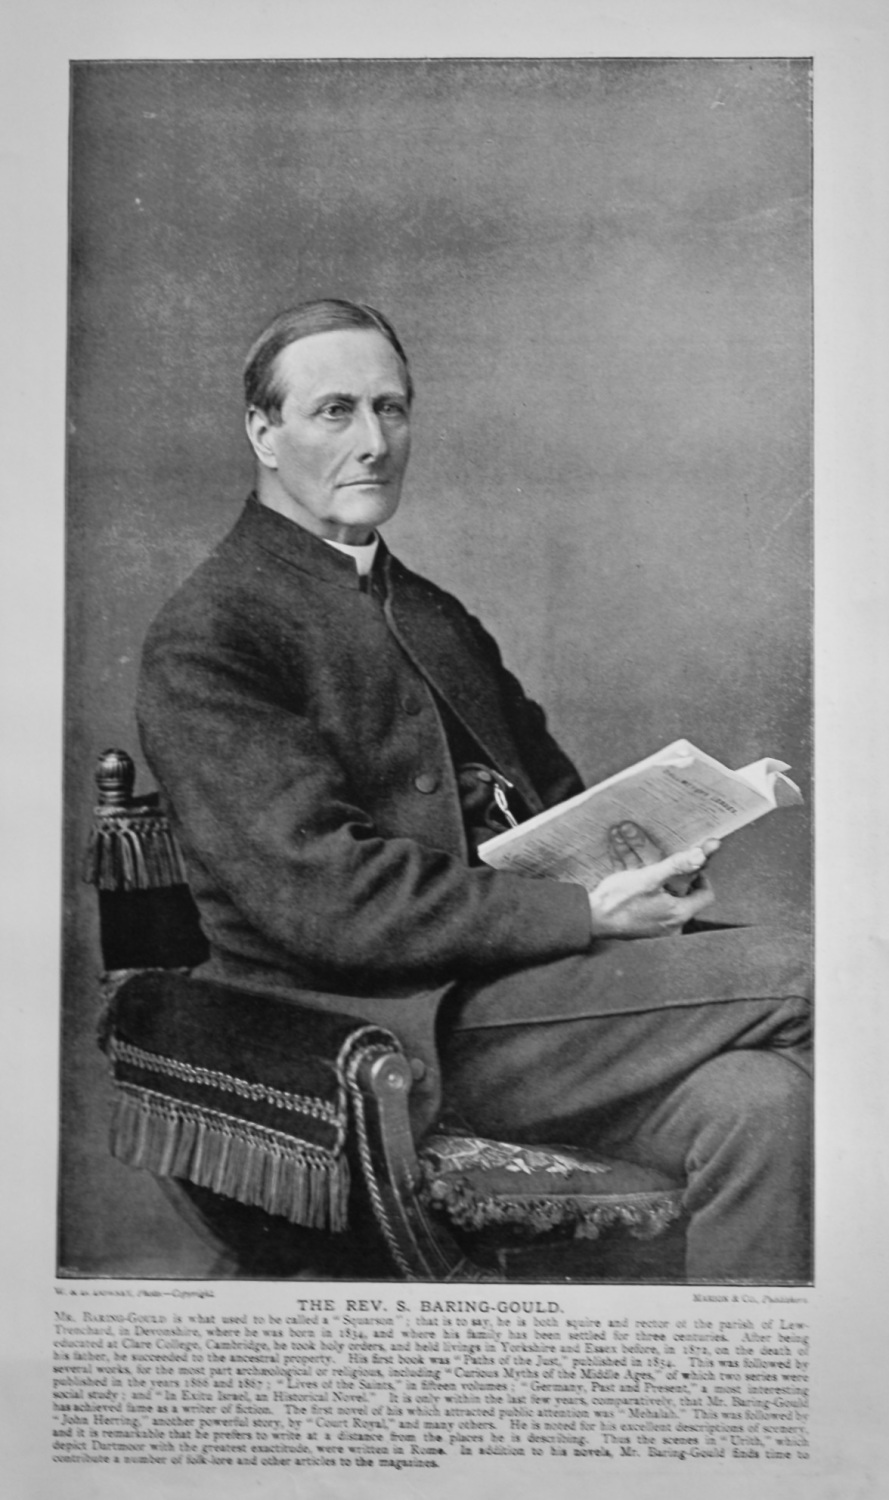 The Rev. S. Baring-Gould. 1900c.